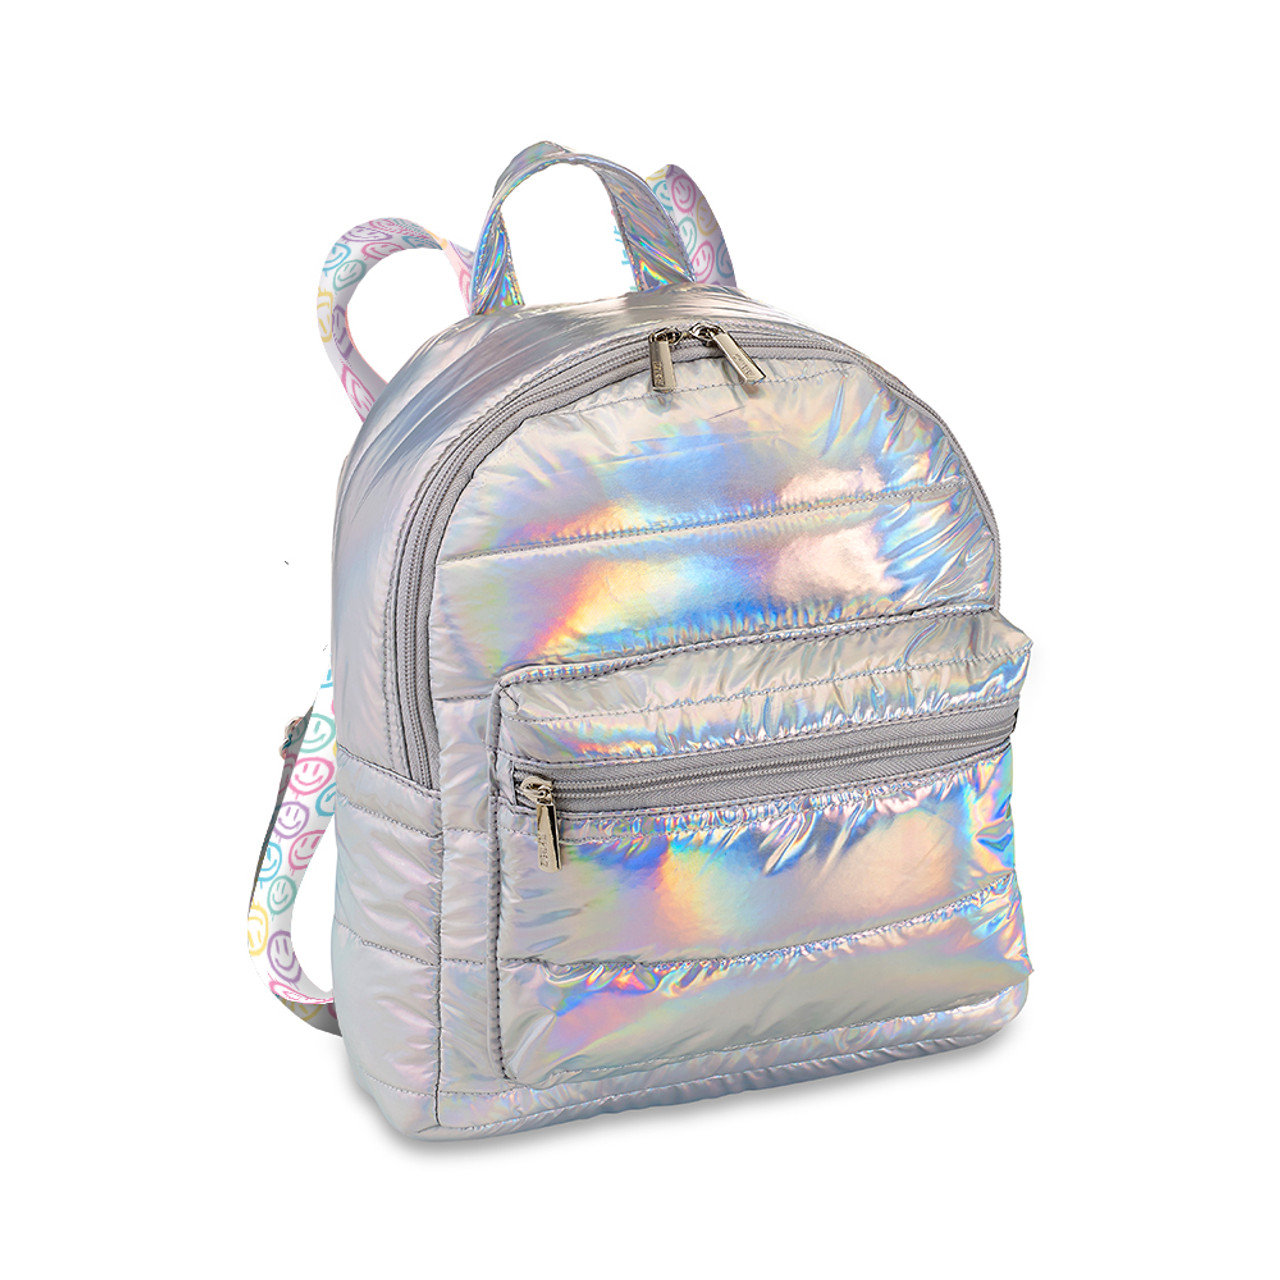 Iridescent Puffer Mini Backpack with new straps